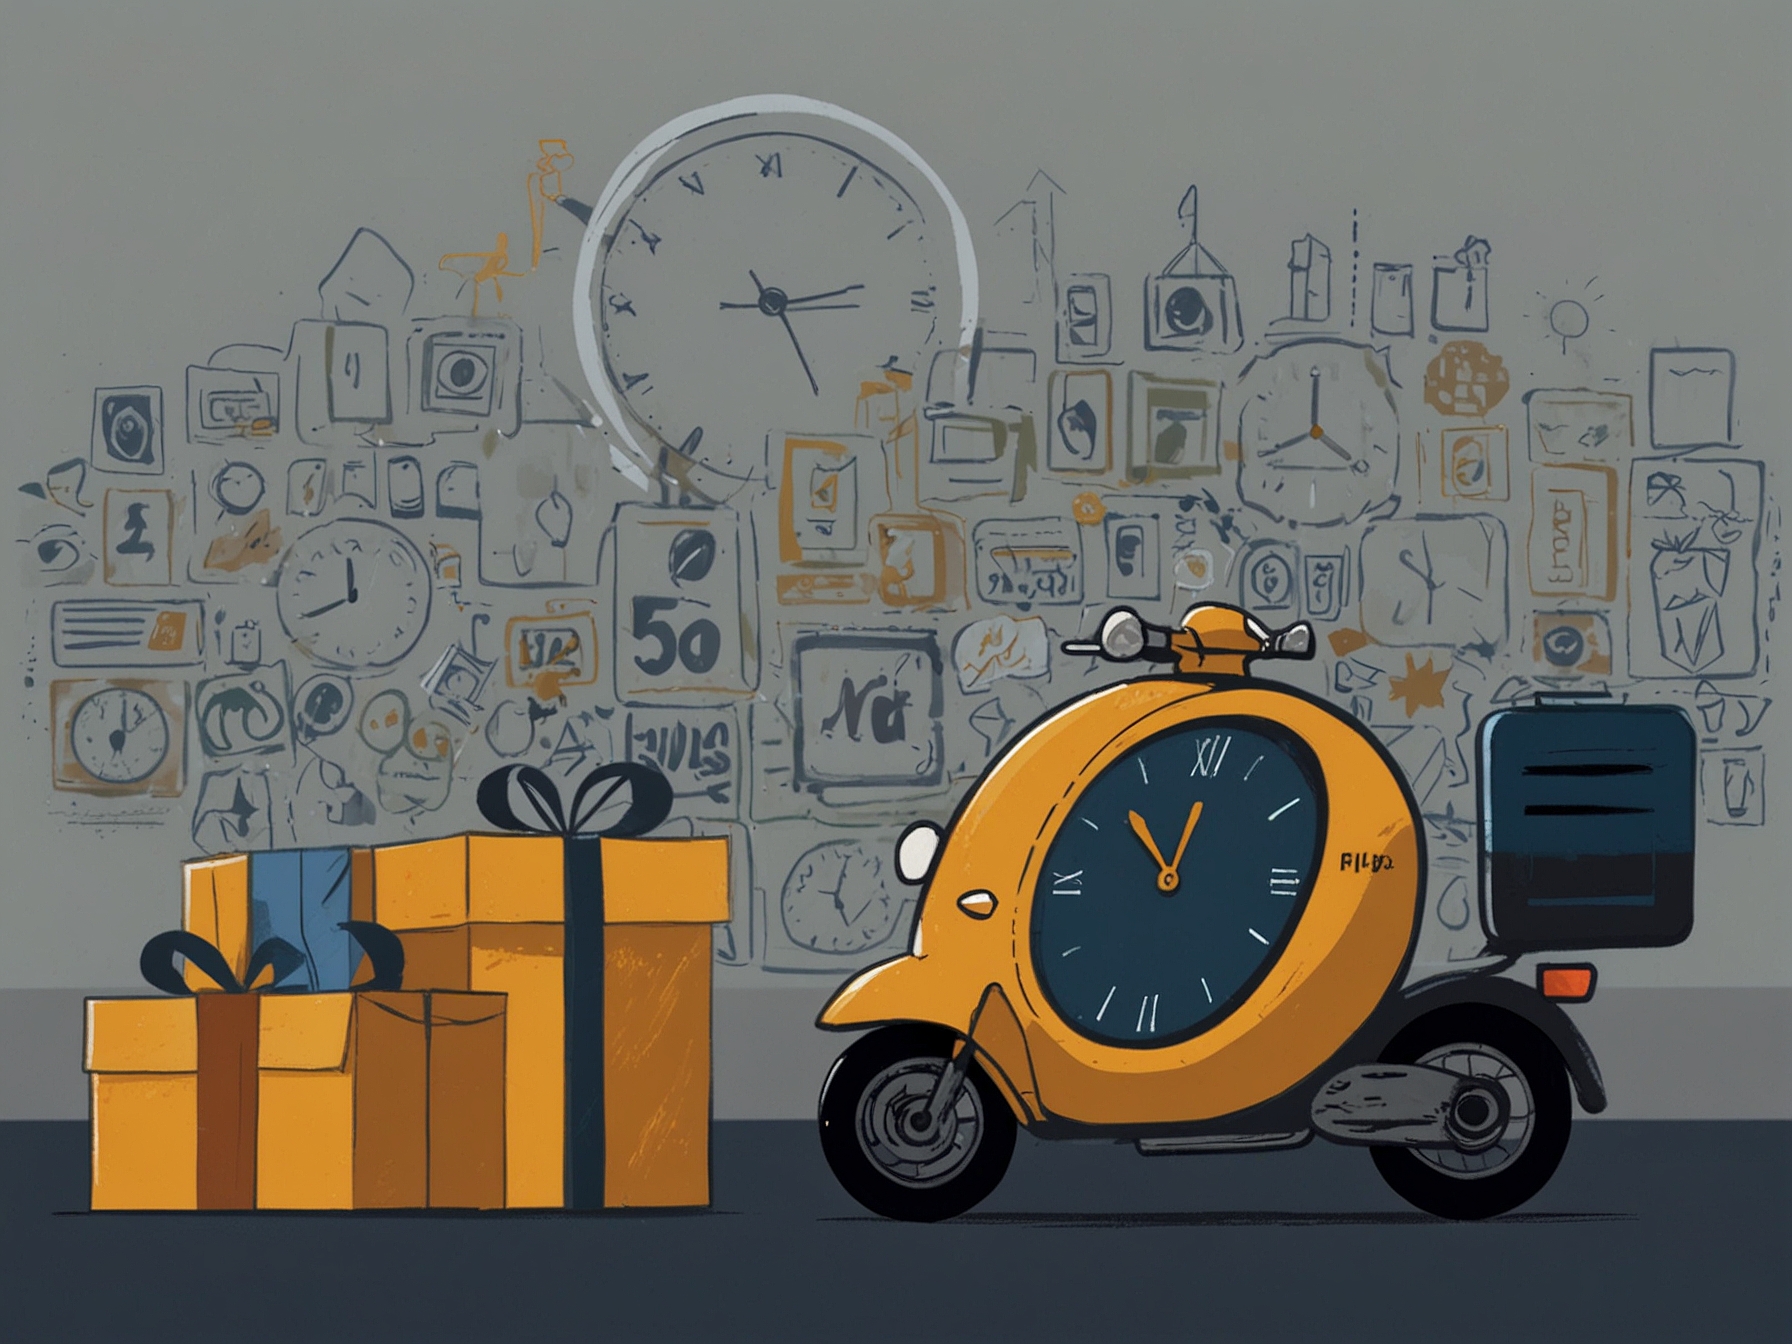 An illustration showing the Flipkart logo alongside delivery icons and a clock, symbolizing the new 15-minute delivery service. The background reflects a dynamic, fast-paced market environment.